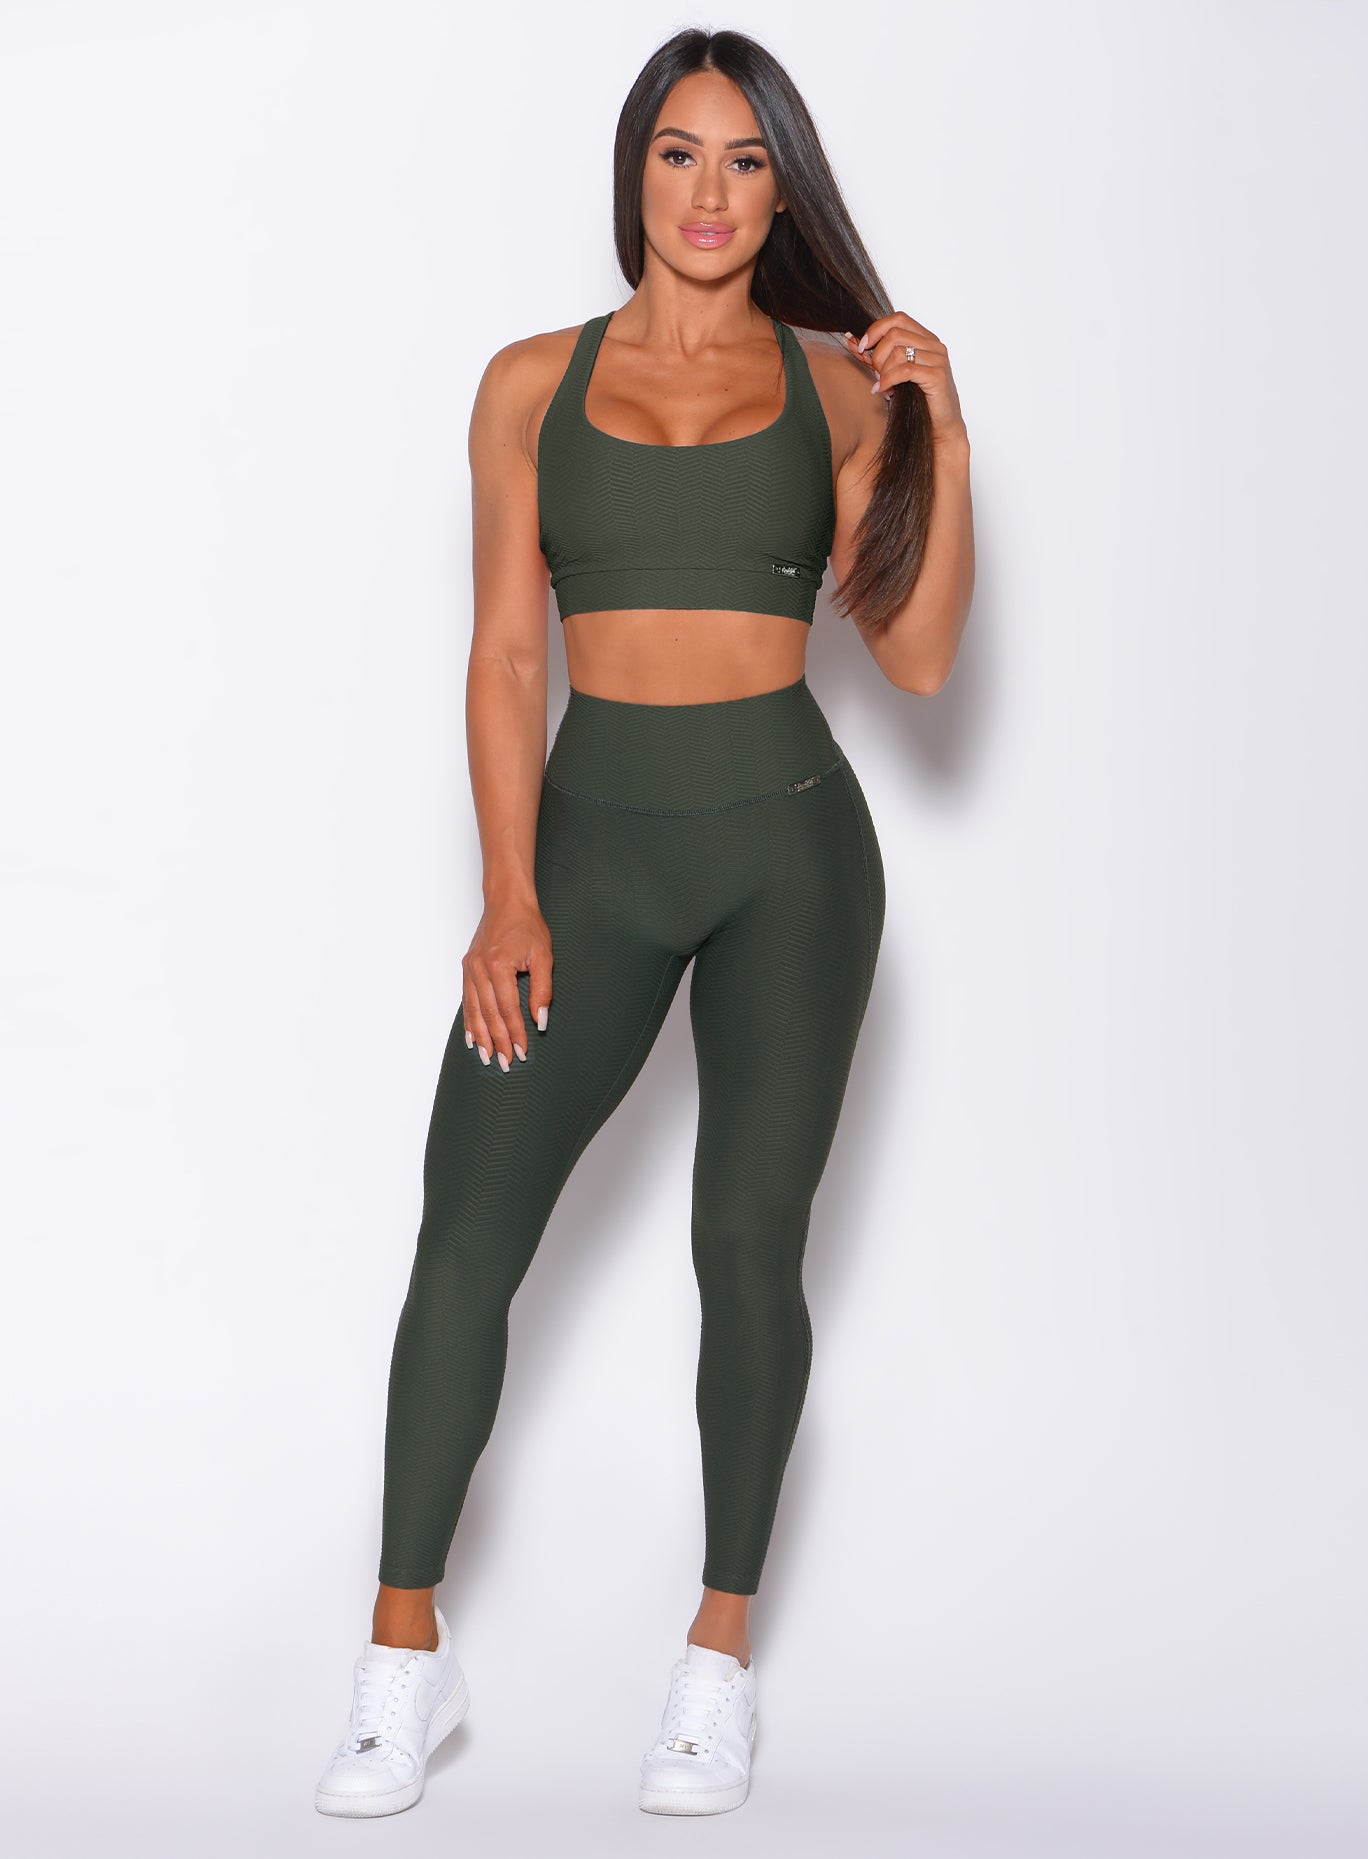 Model facing forward wearing our chevron leggings in lucky green color and a matching bra